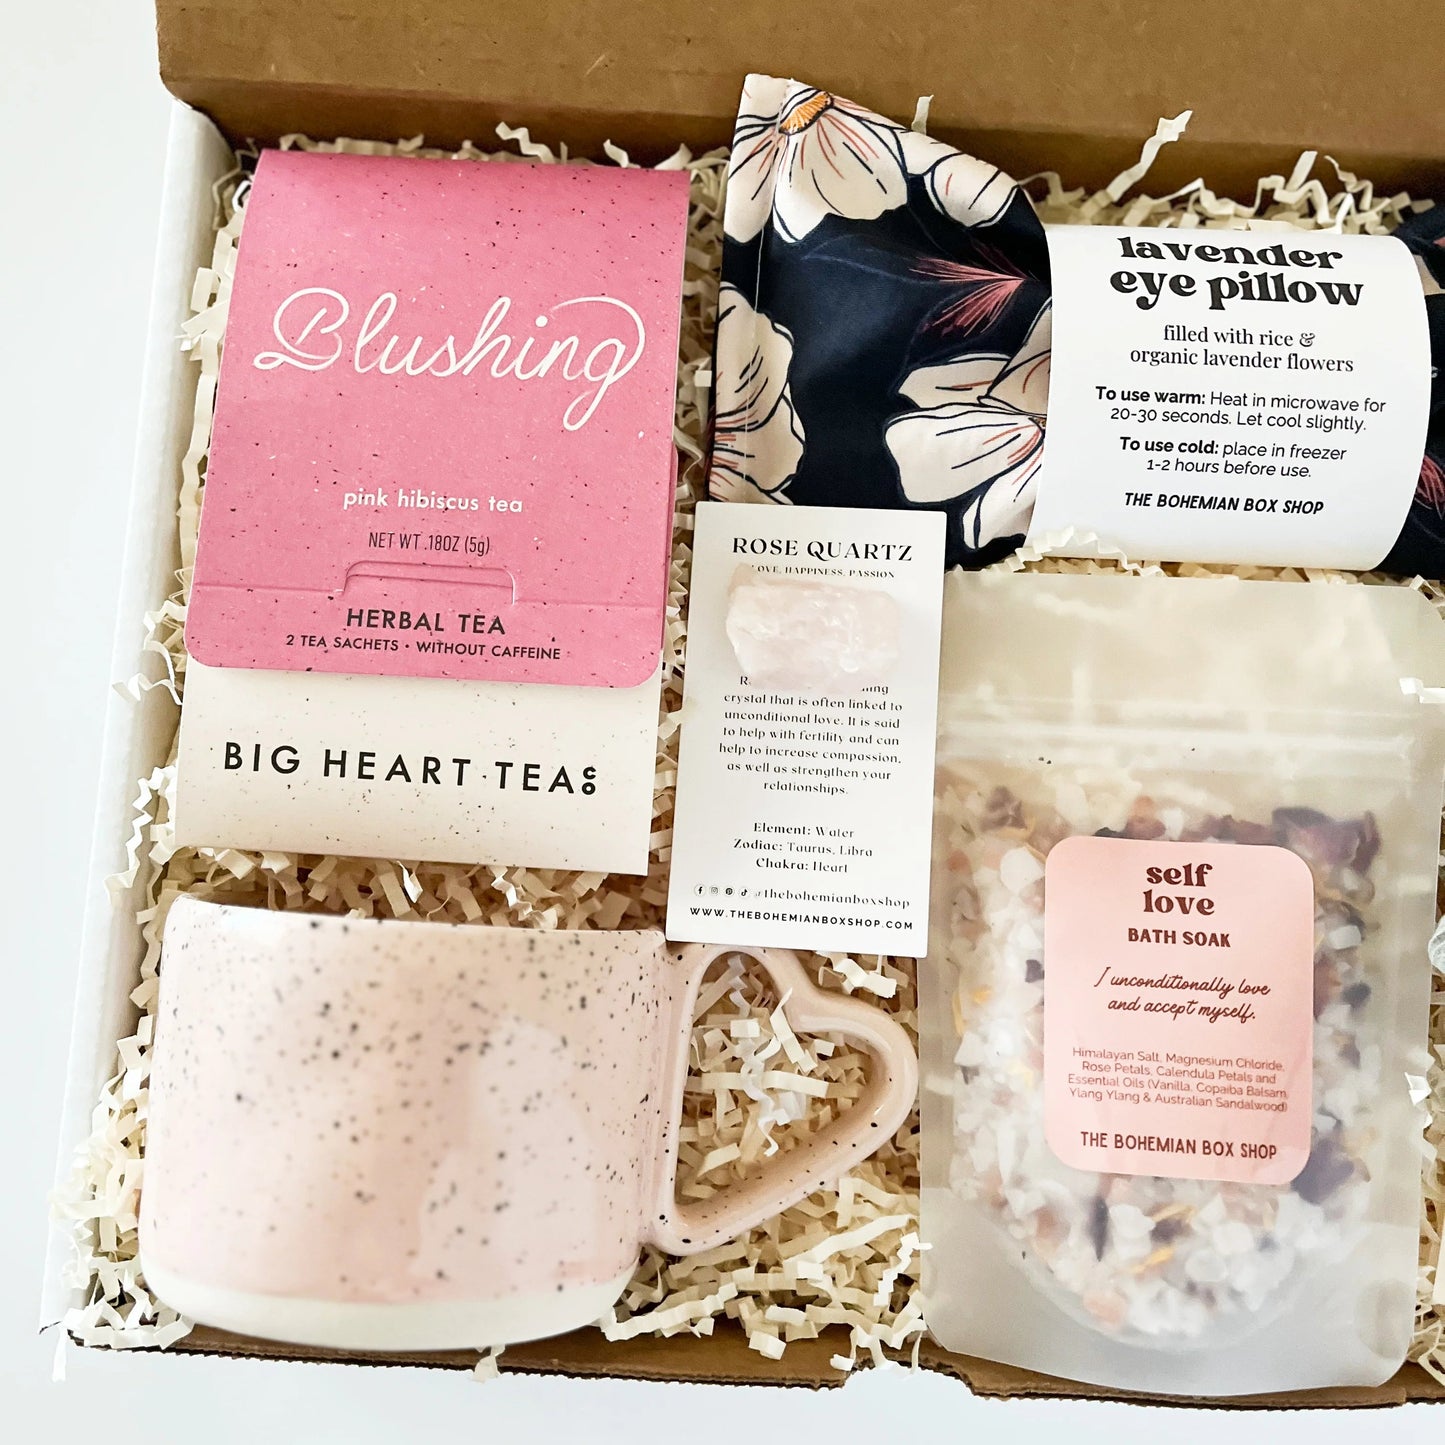 Self-love care package for her. Contains blushing tea, heart shaped mug, rose quartz crystal, lavender eye pillow, self-love bath soak with affirmation and mini sage bundle. 